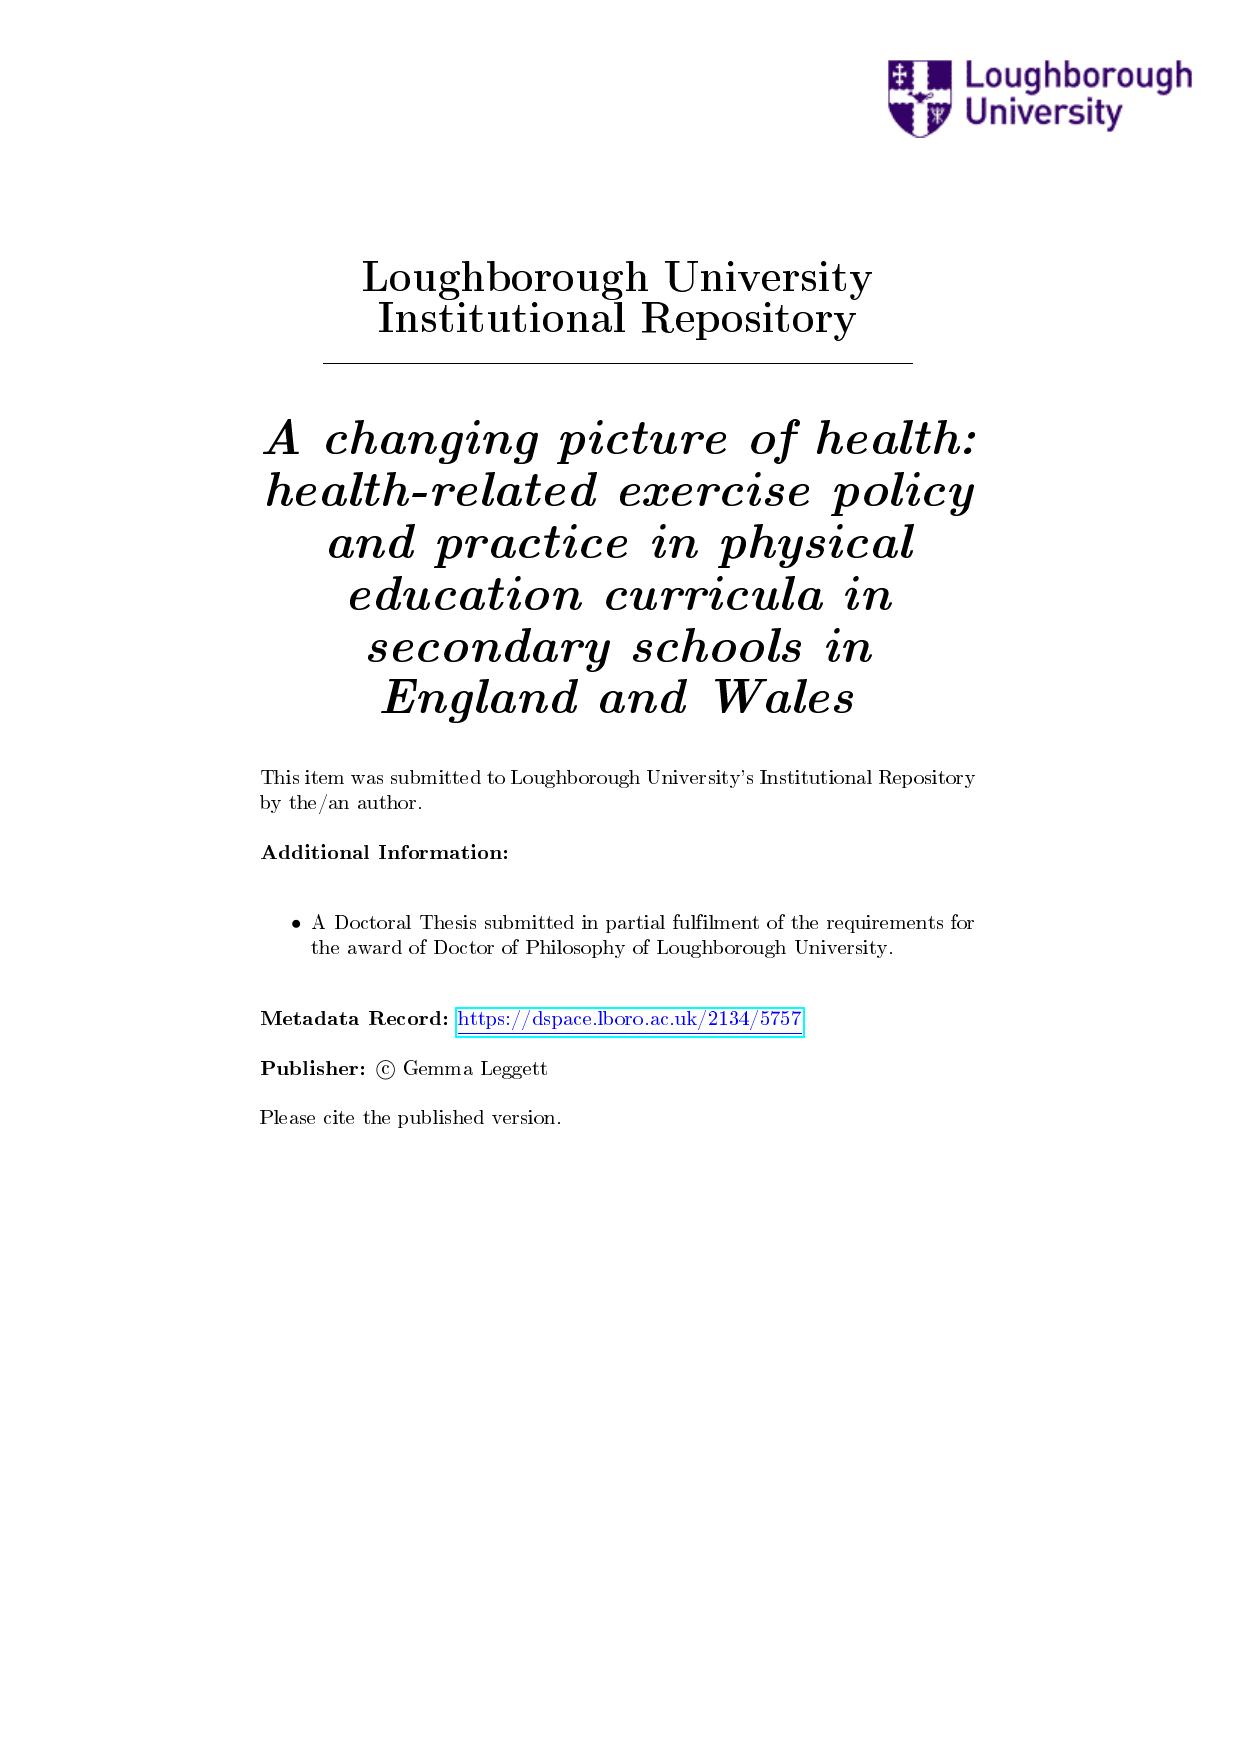 health-related exercise policy and practice in physical education curricula in secondary schools 2017